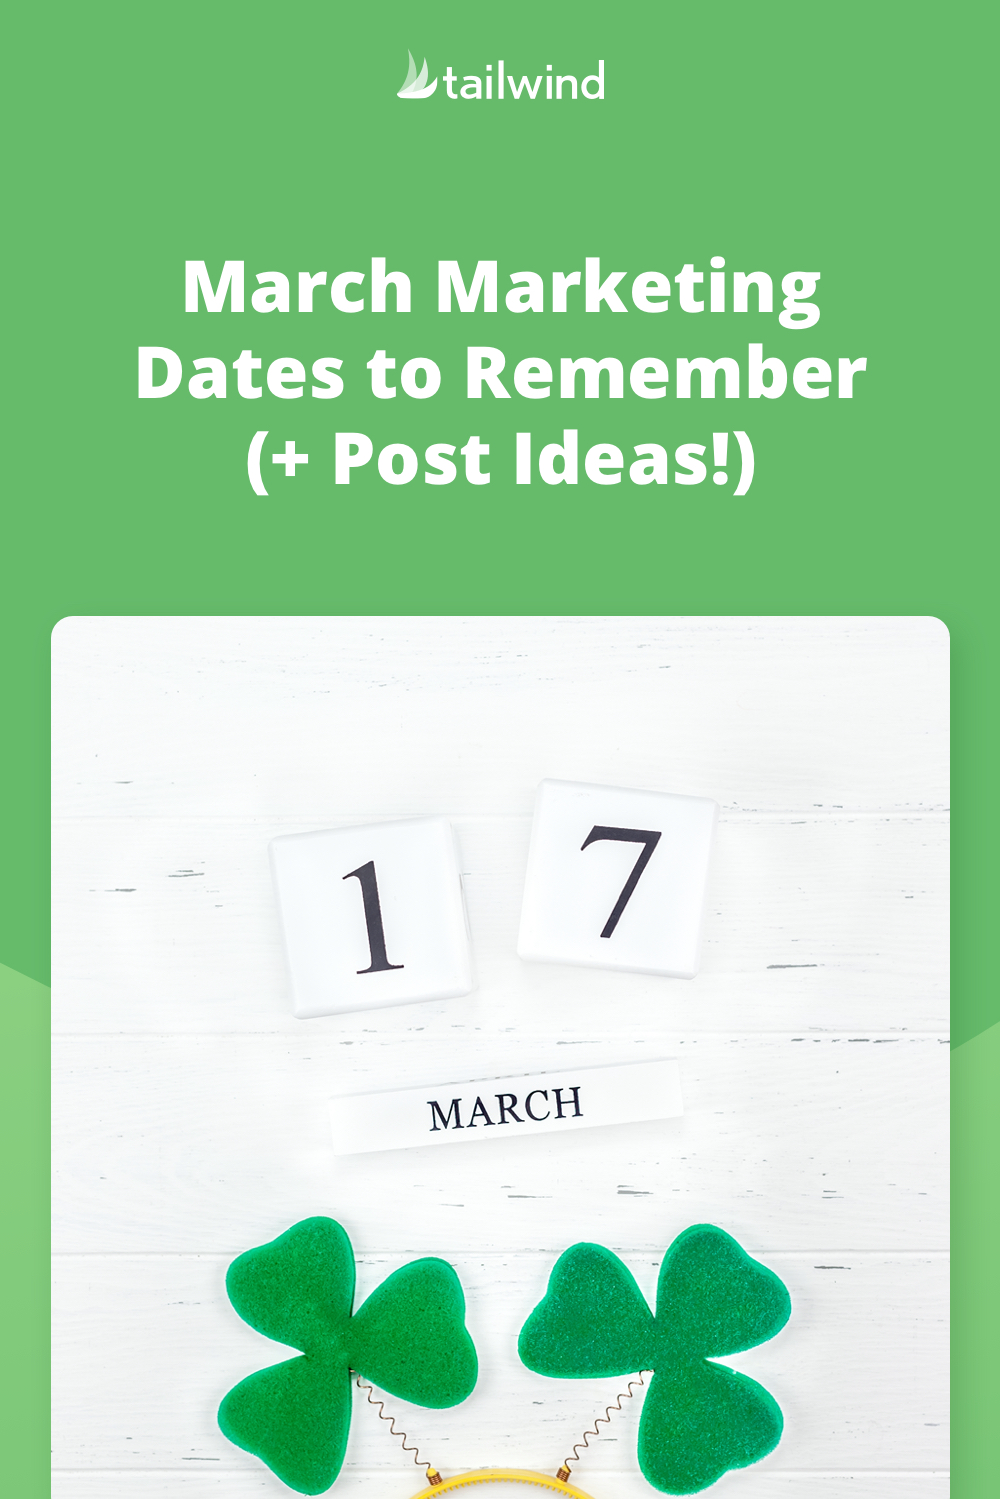 March Marketing Dates to Remember + Post Ideas!